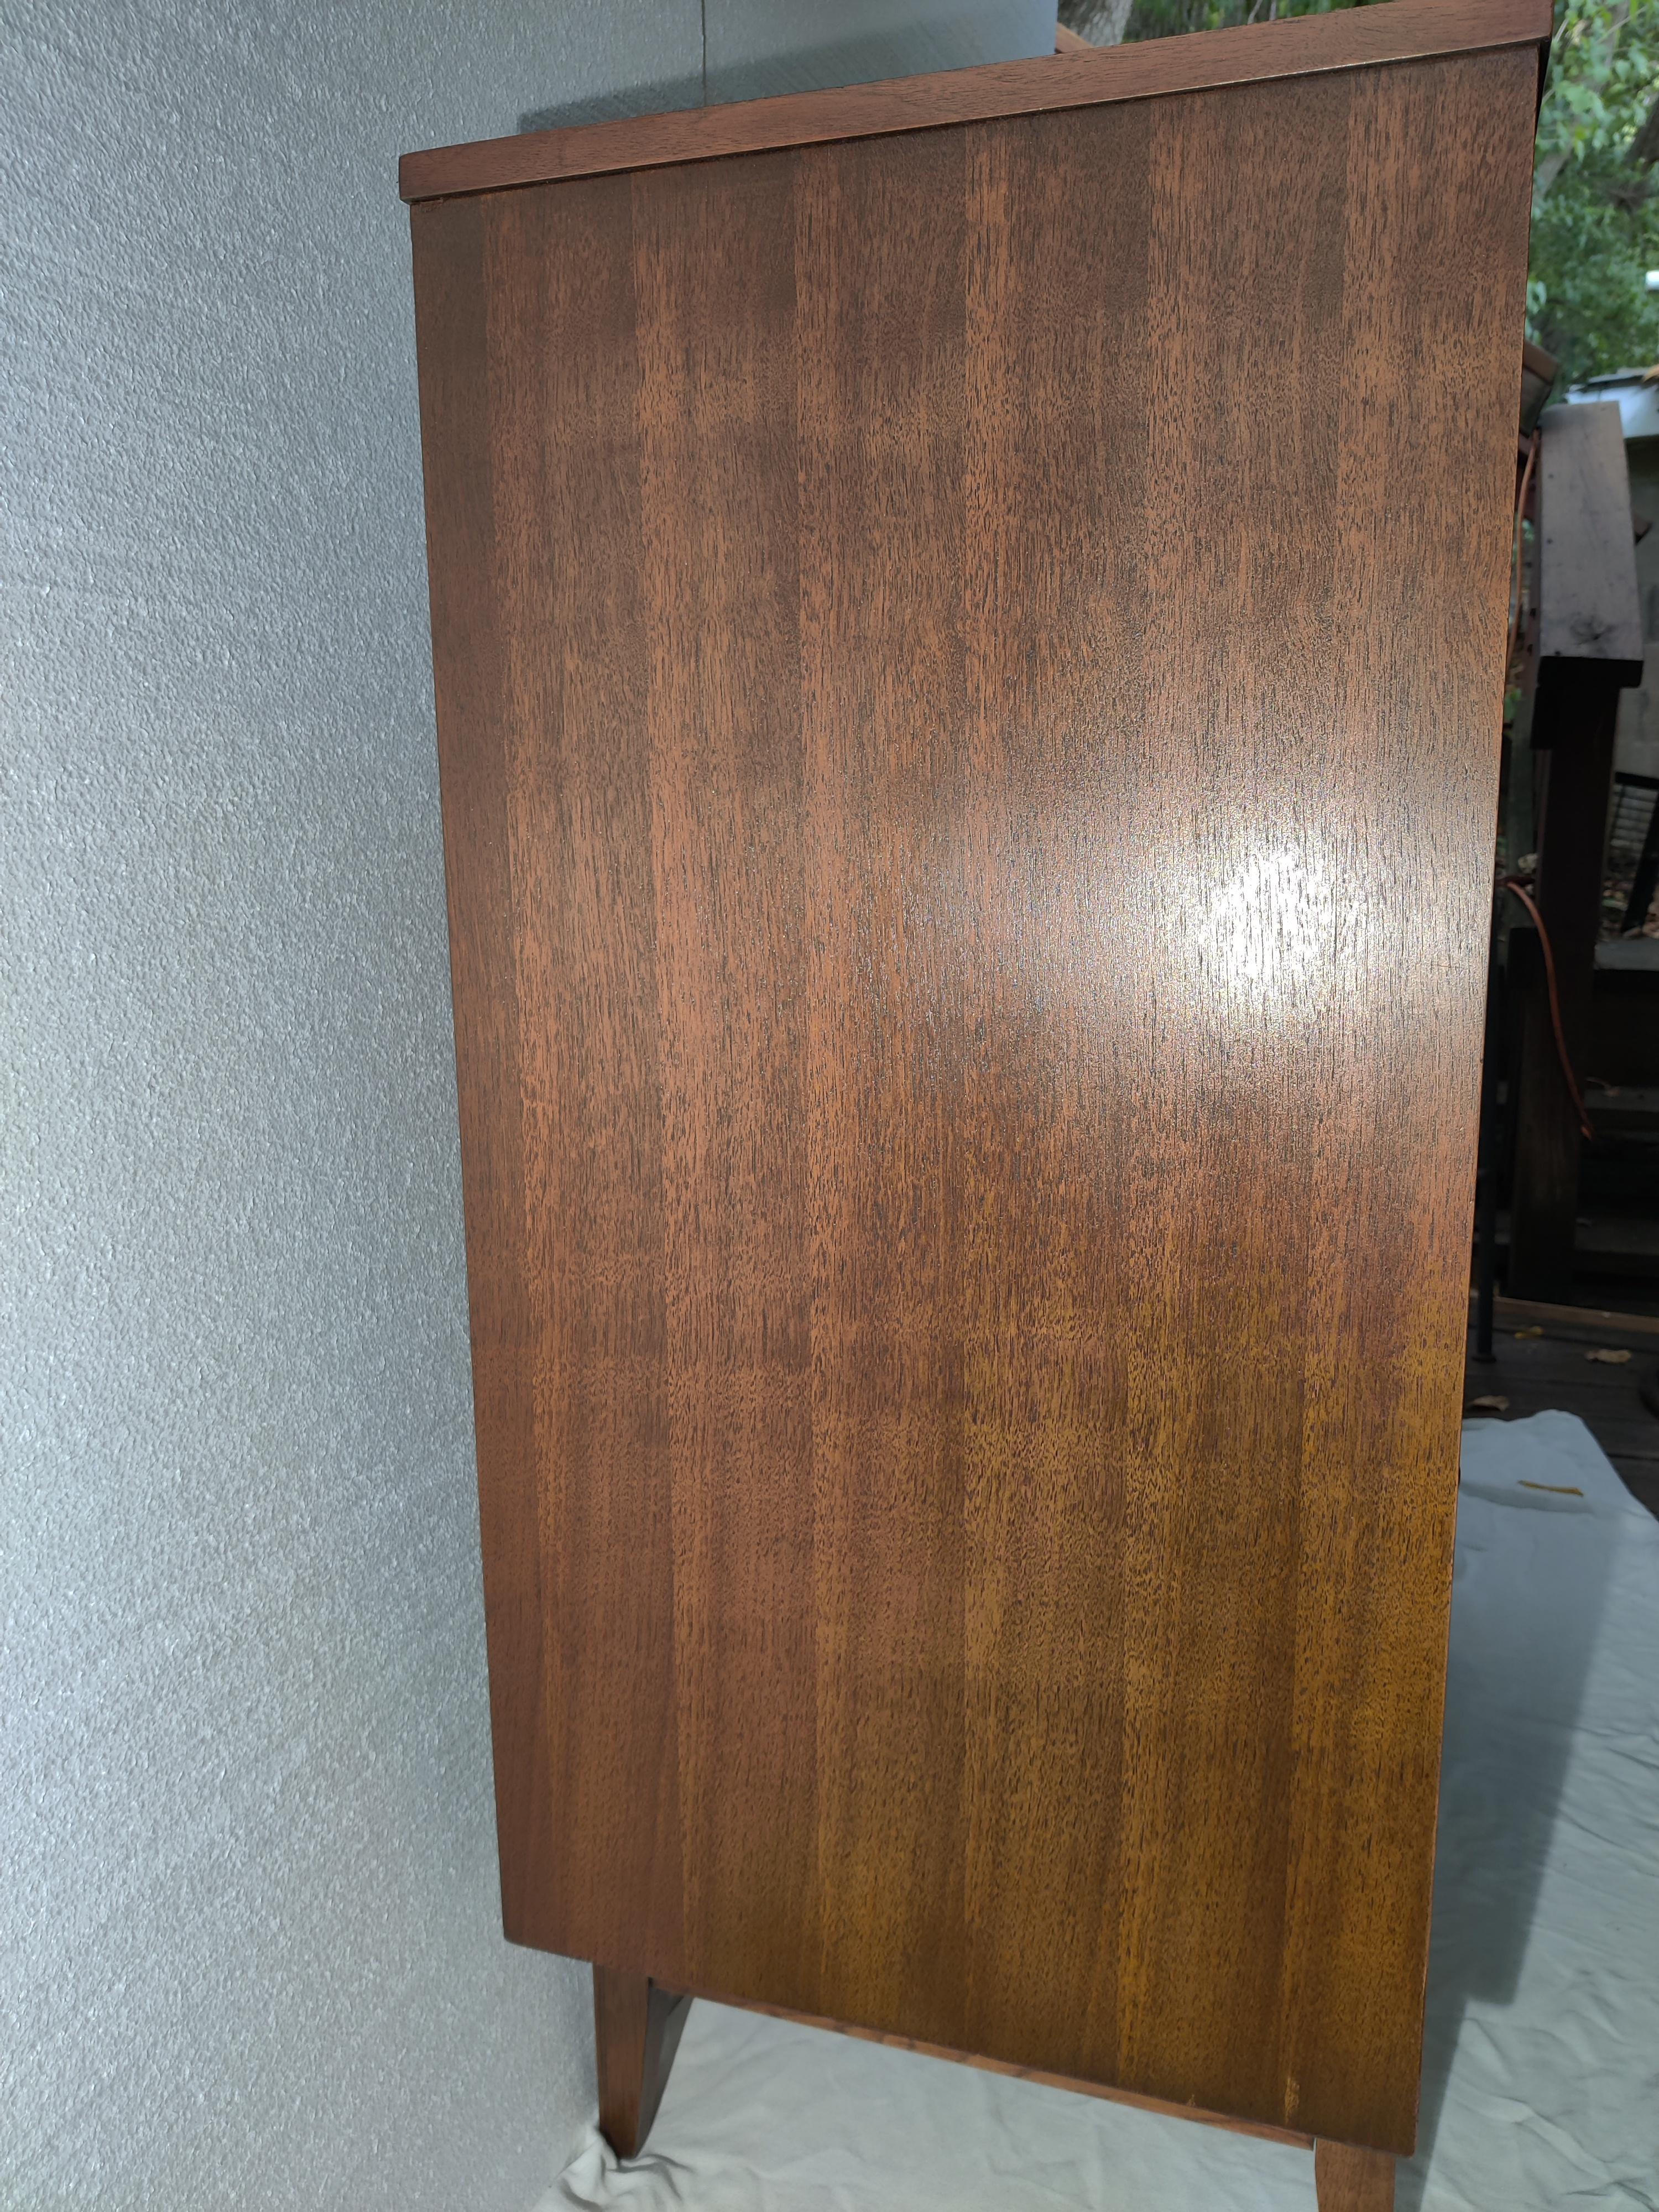 Broyhill Brasilia Mid Century Modern Tall Walnut Highboy Dresser
Hardwood and walnut veneers.
Original pulls.
Highboy is in good condition and normal ware for it's age.
Few small indentations on top rear.  See last photo.
Original finish on sides